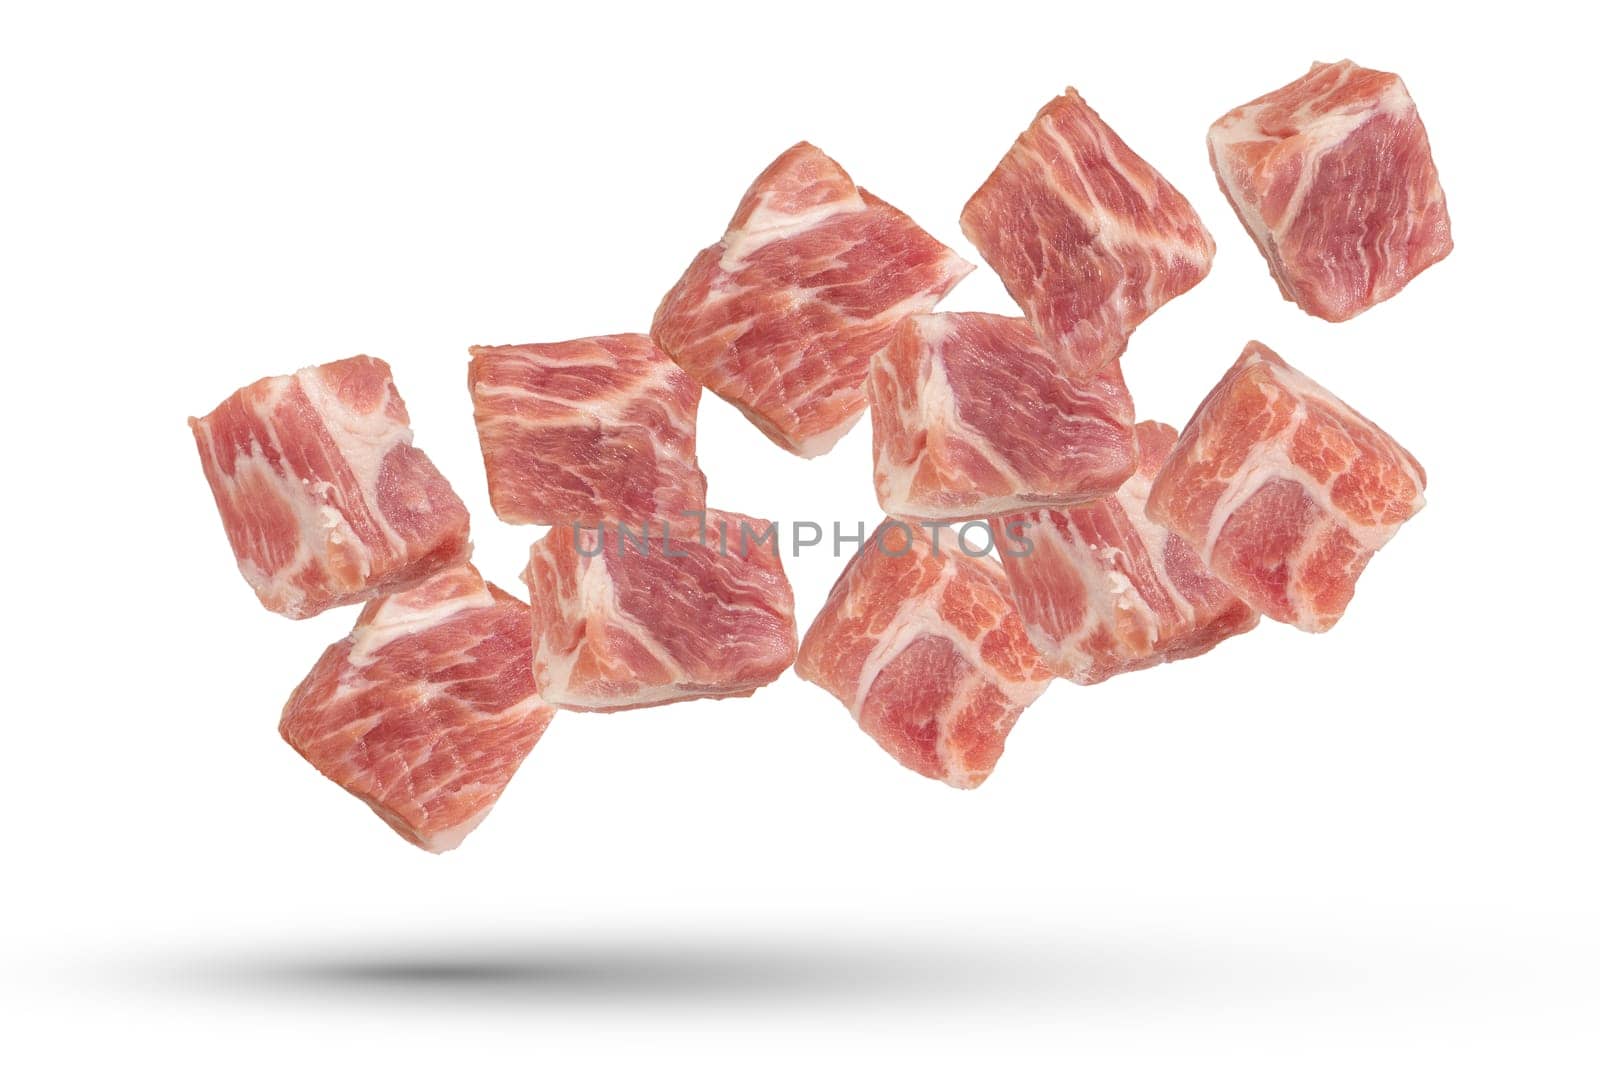 Raw pork cubes. Cubes of pieces of pork scatter in different directions, isolated on a white background. Isolate cubes of juicy pork for inserting into a design or project. by SERSOL